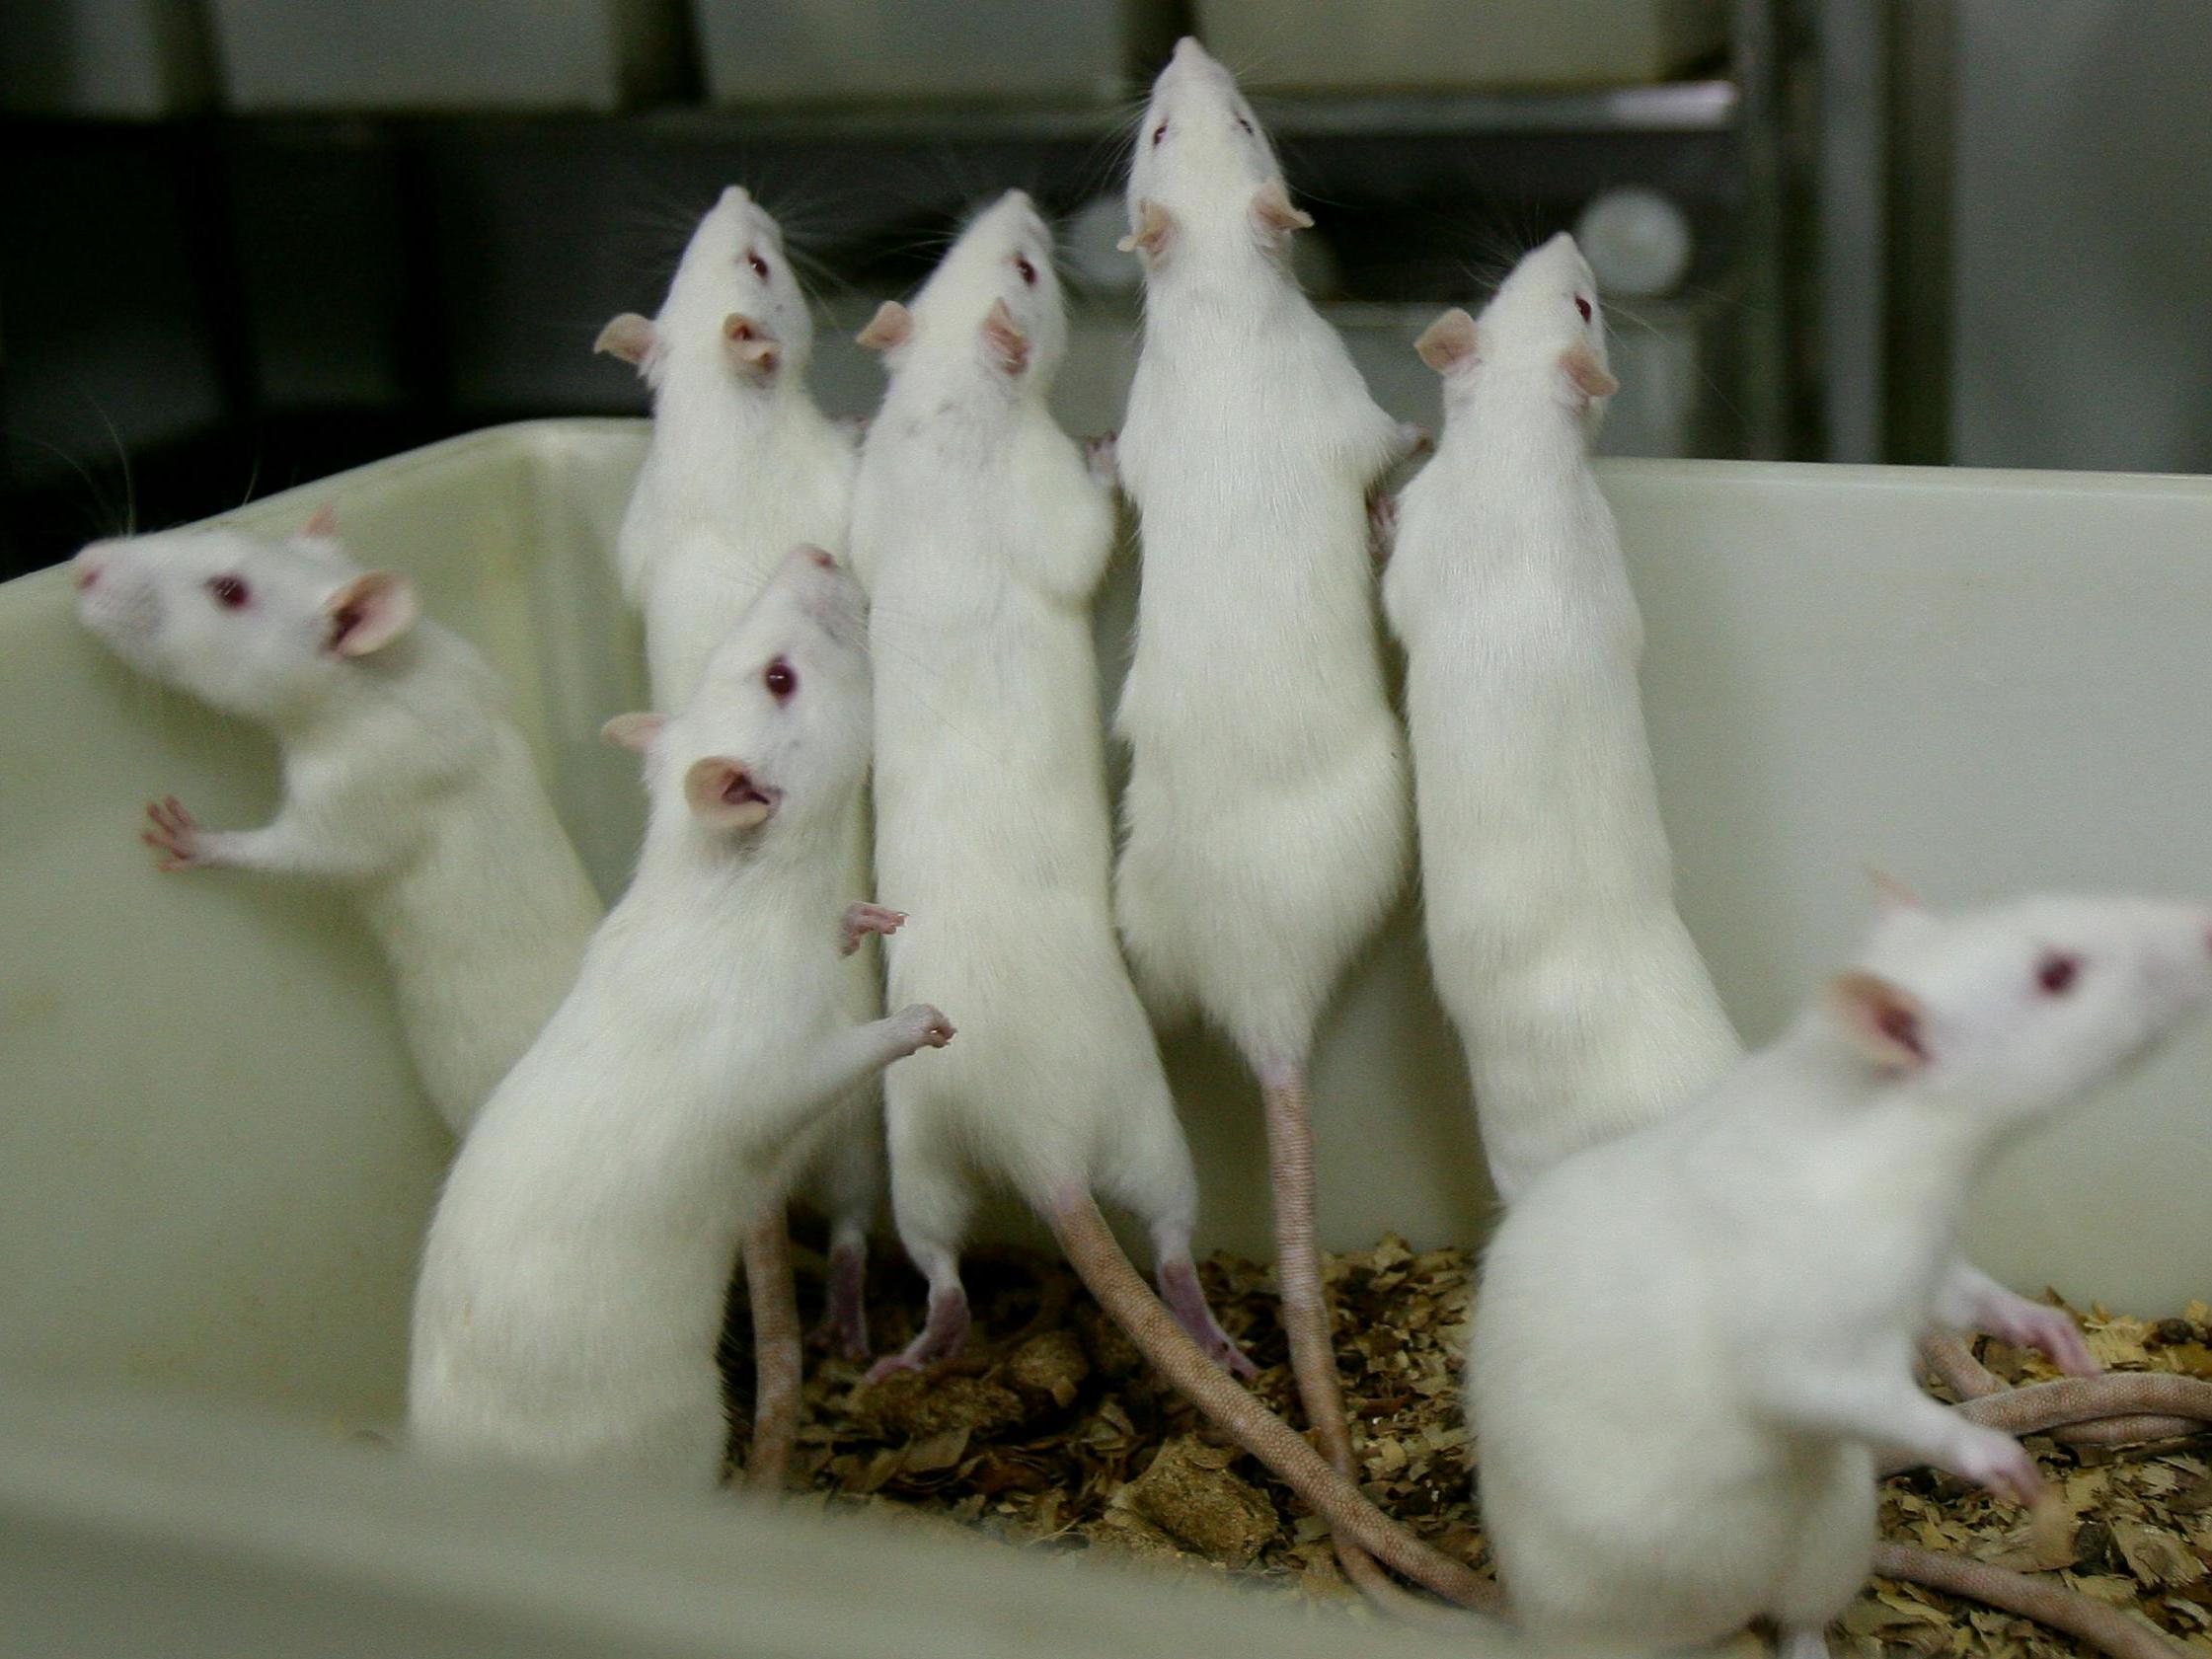 The majority of procedures used mice, fish or rats, which have been the most used for the past decade